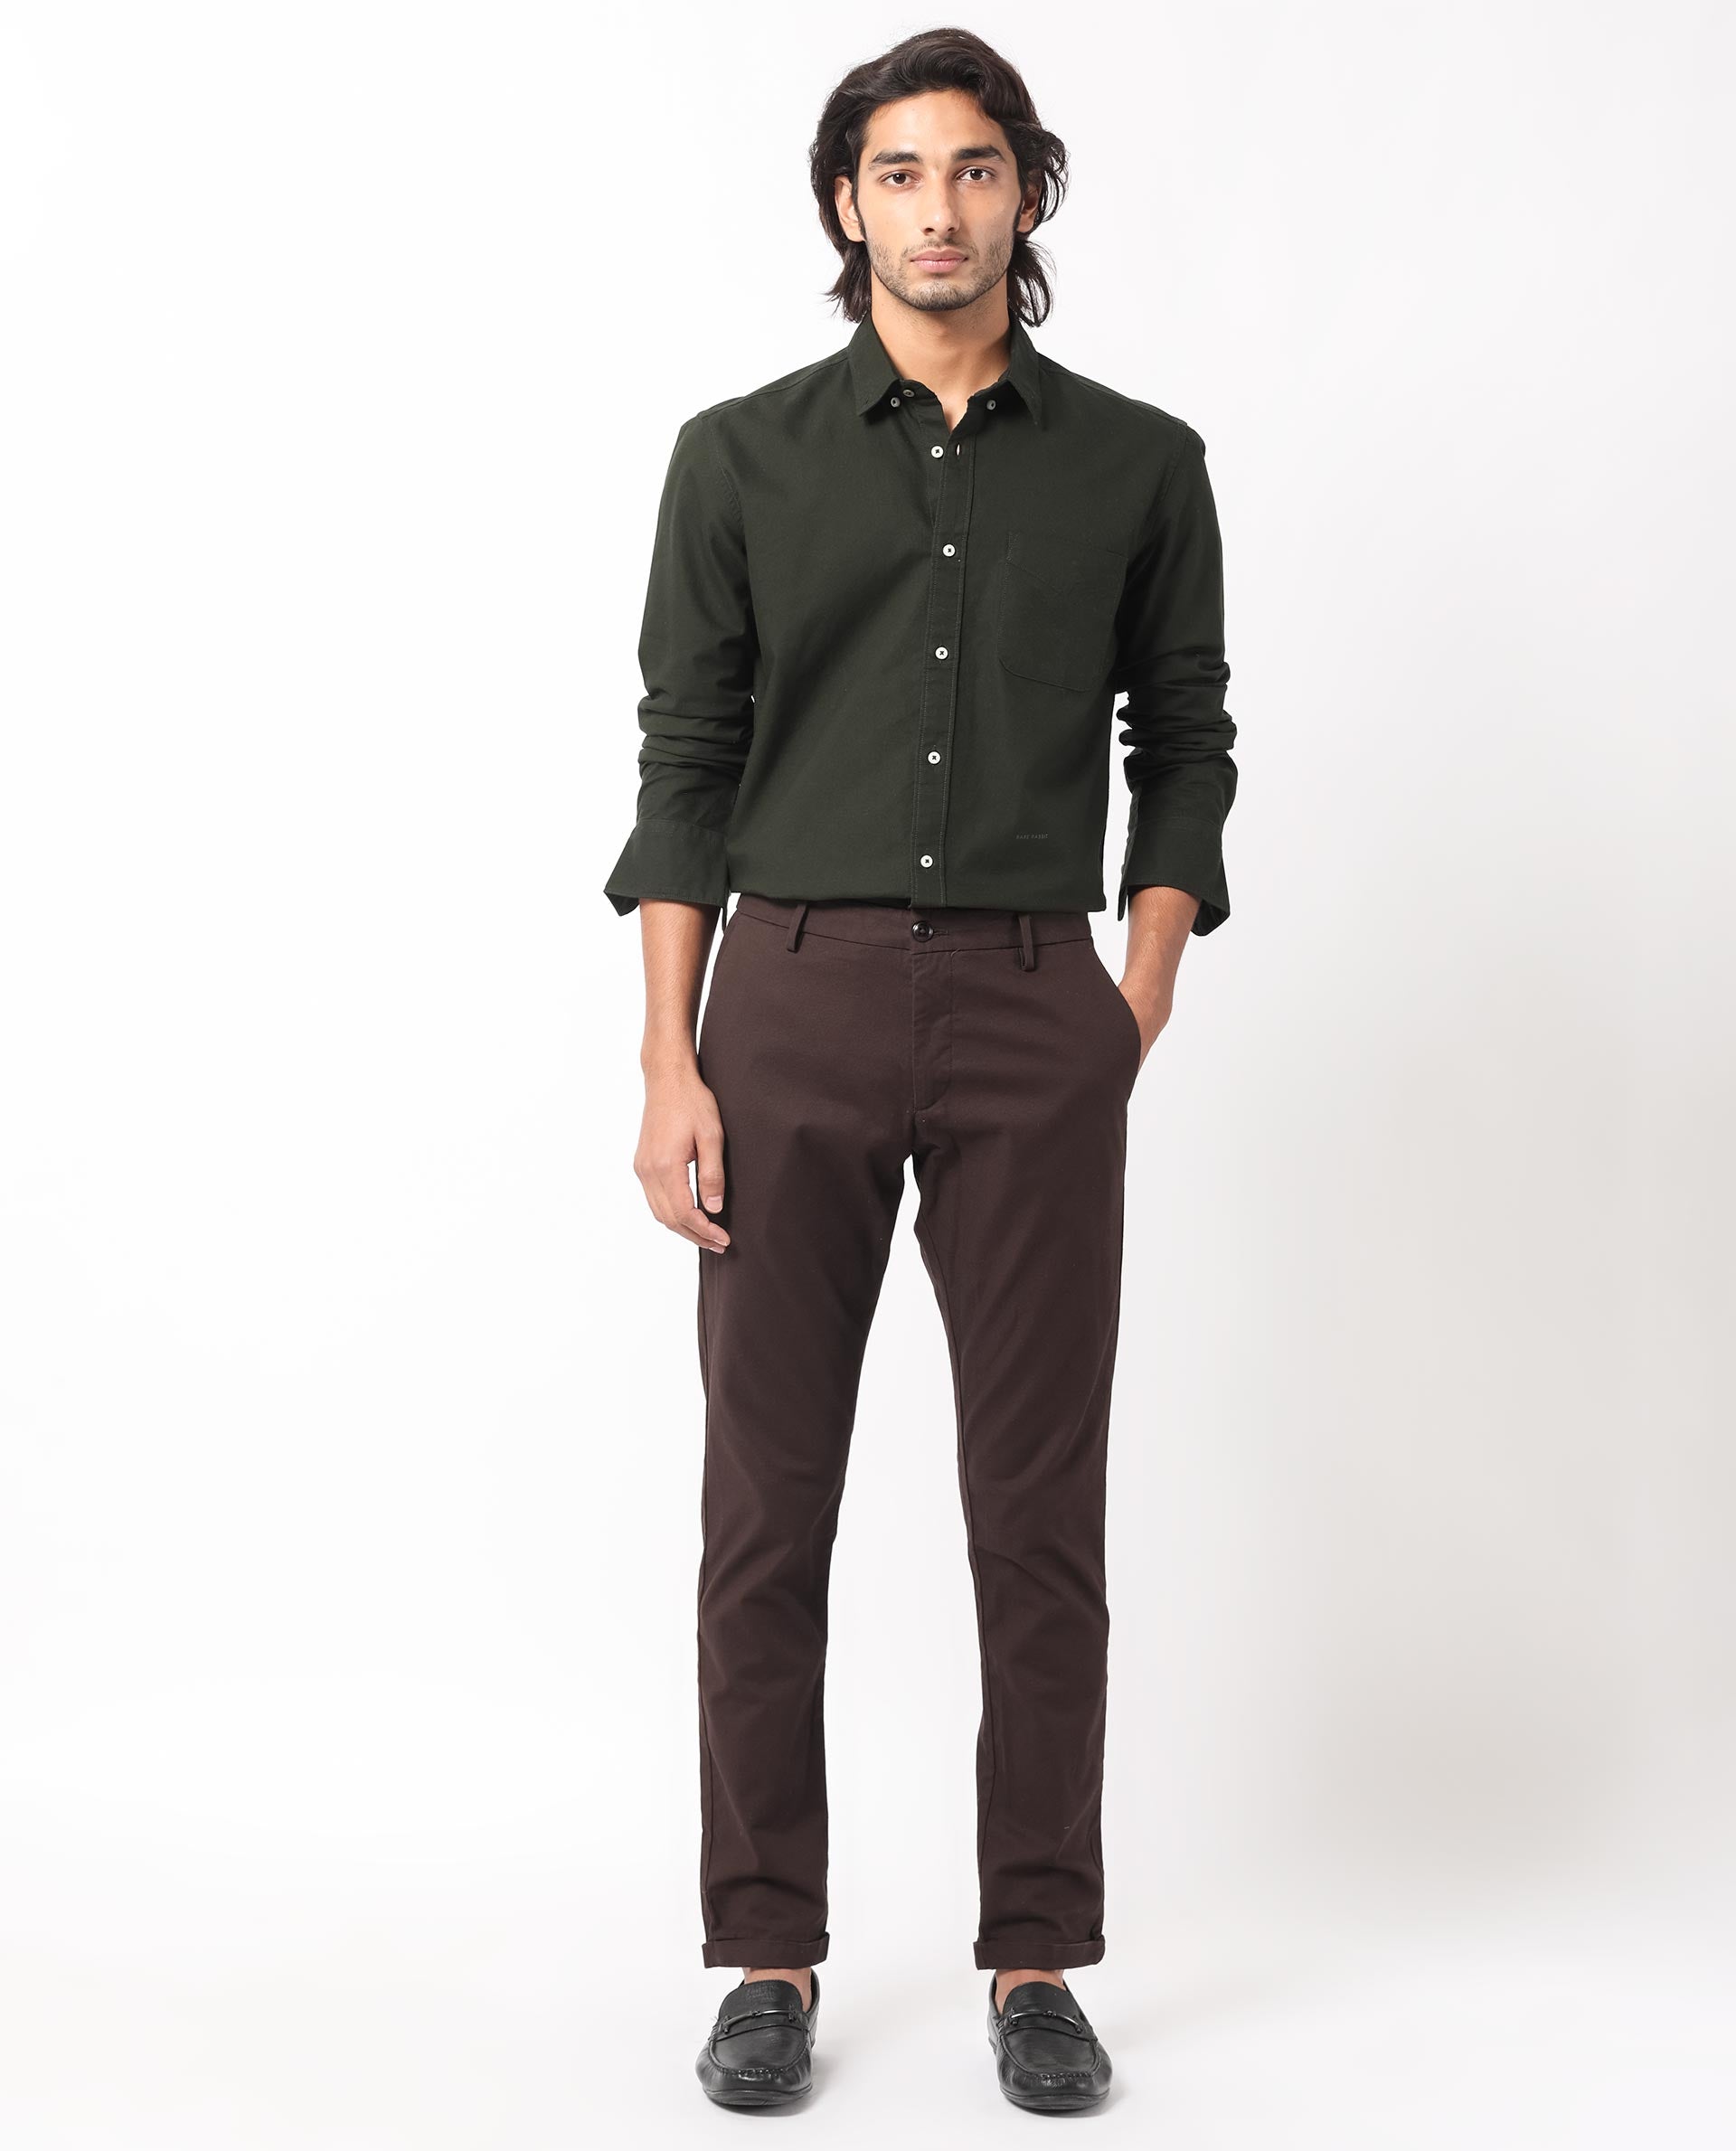 What color pants look good with green shirts? - Quora